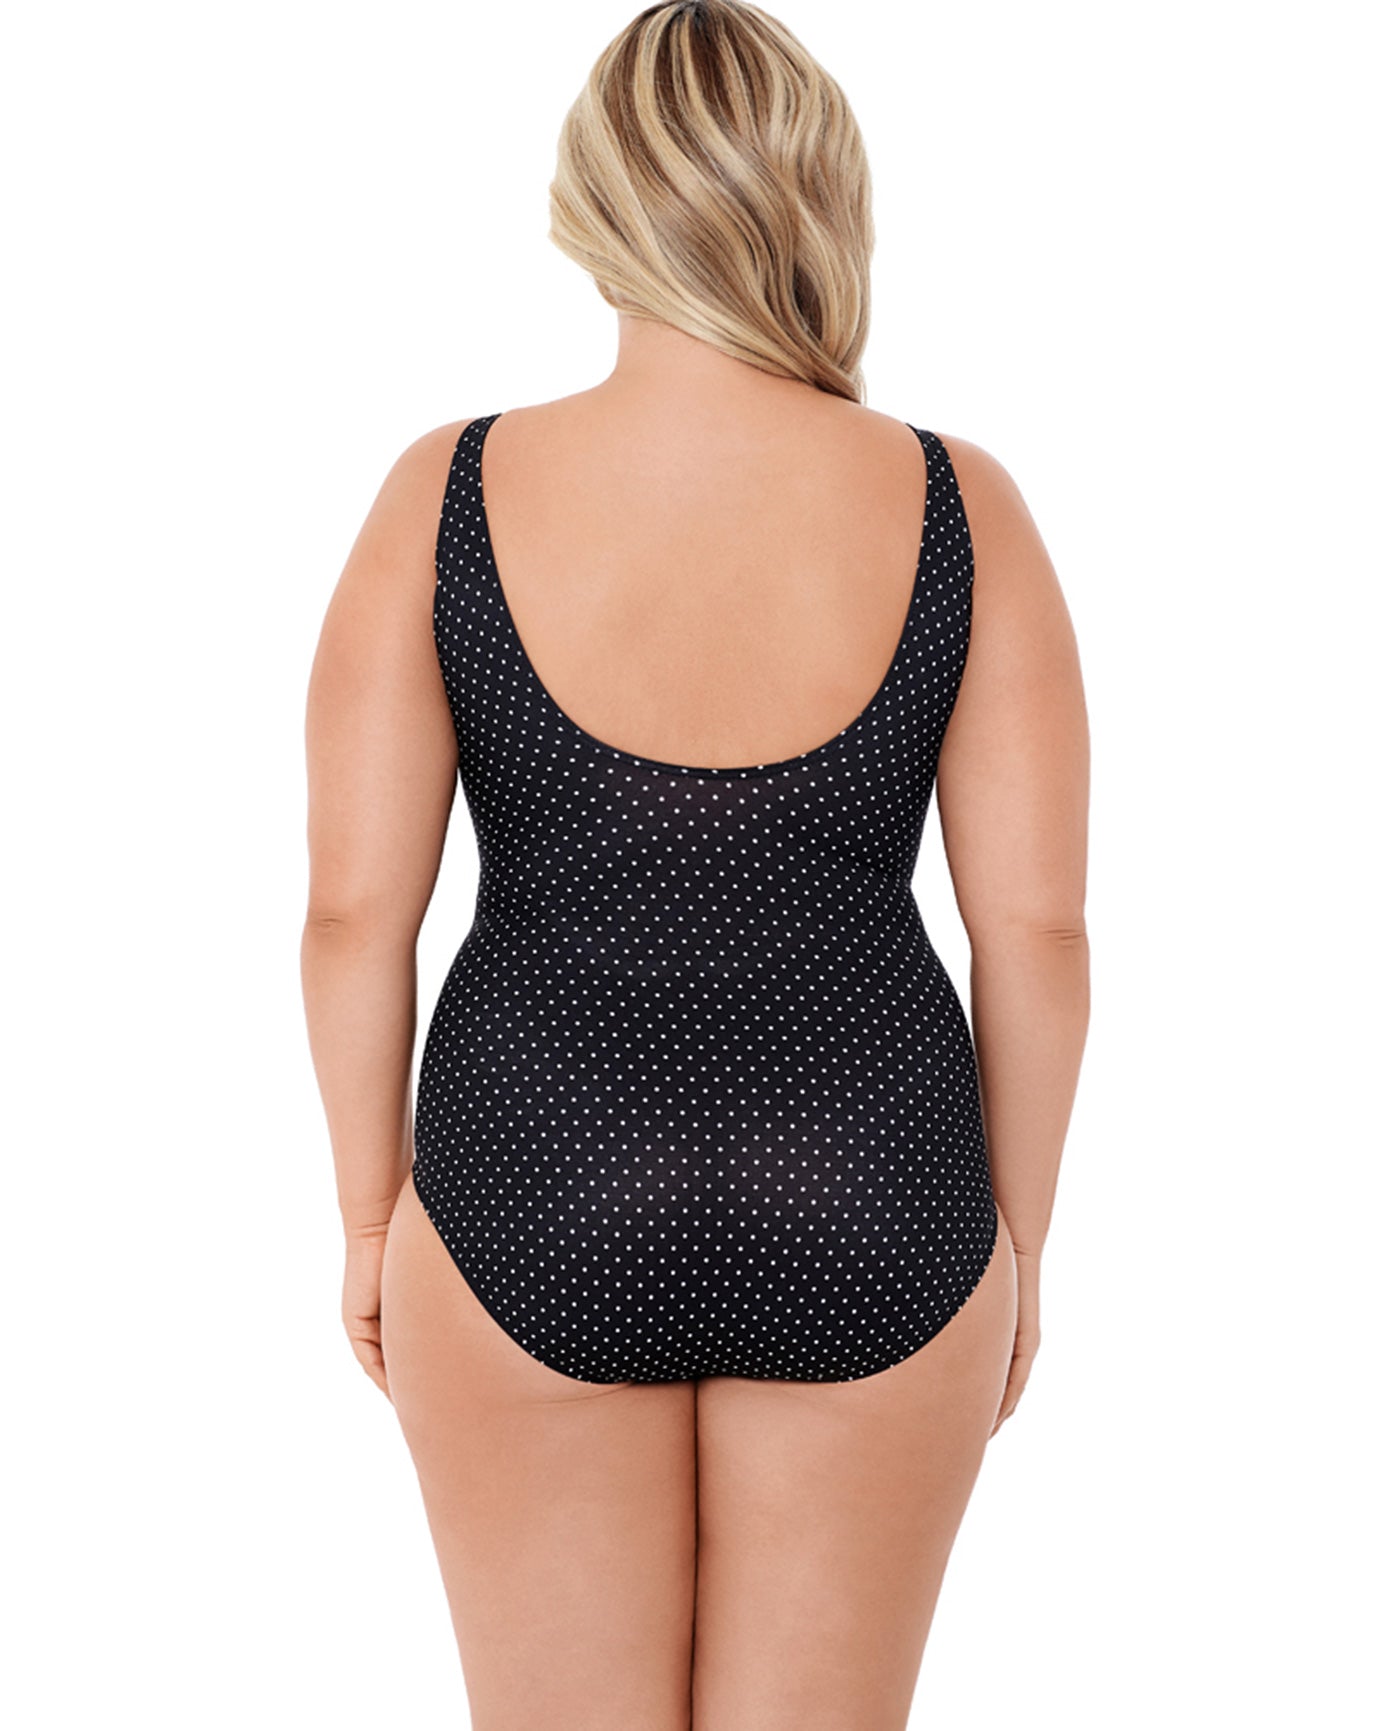 Back View Of Miraclesuit Pin Point Plus Size Oceanus One Piece Swimsuit | MIR Black White